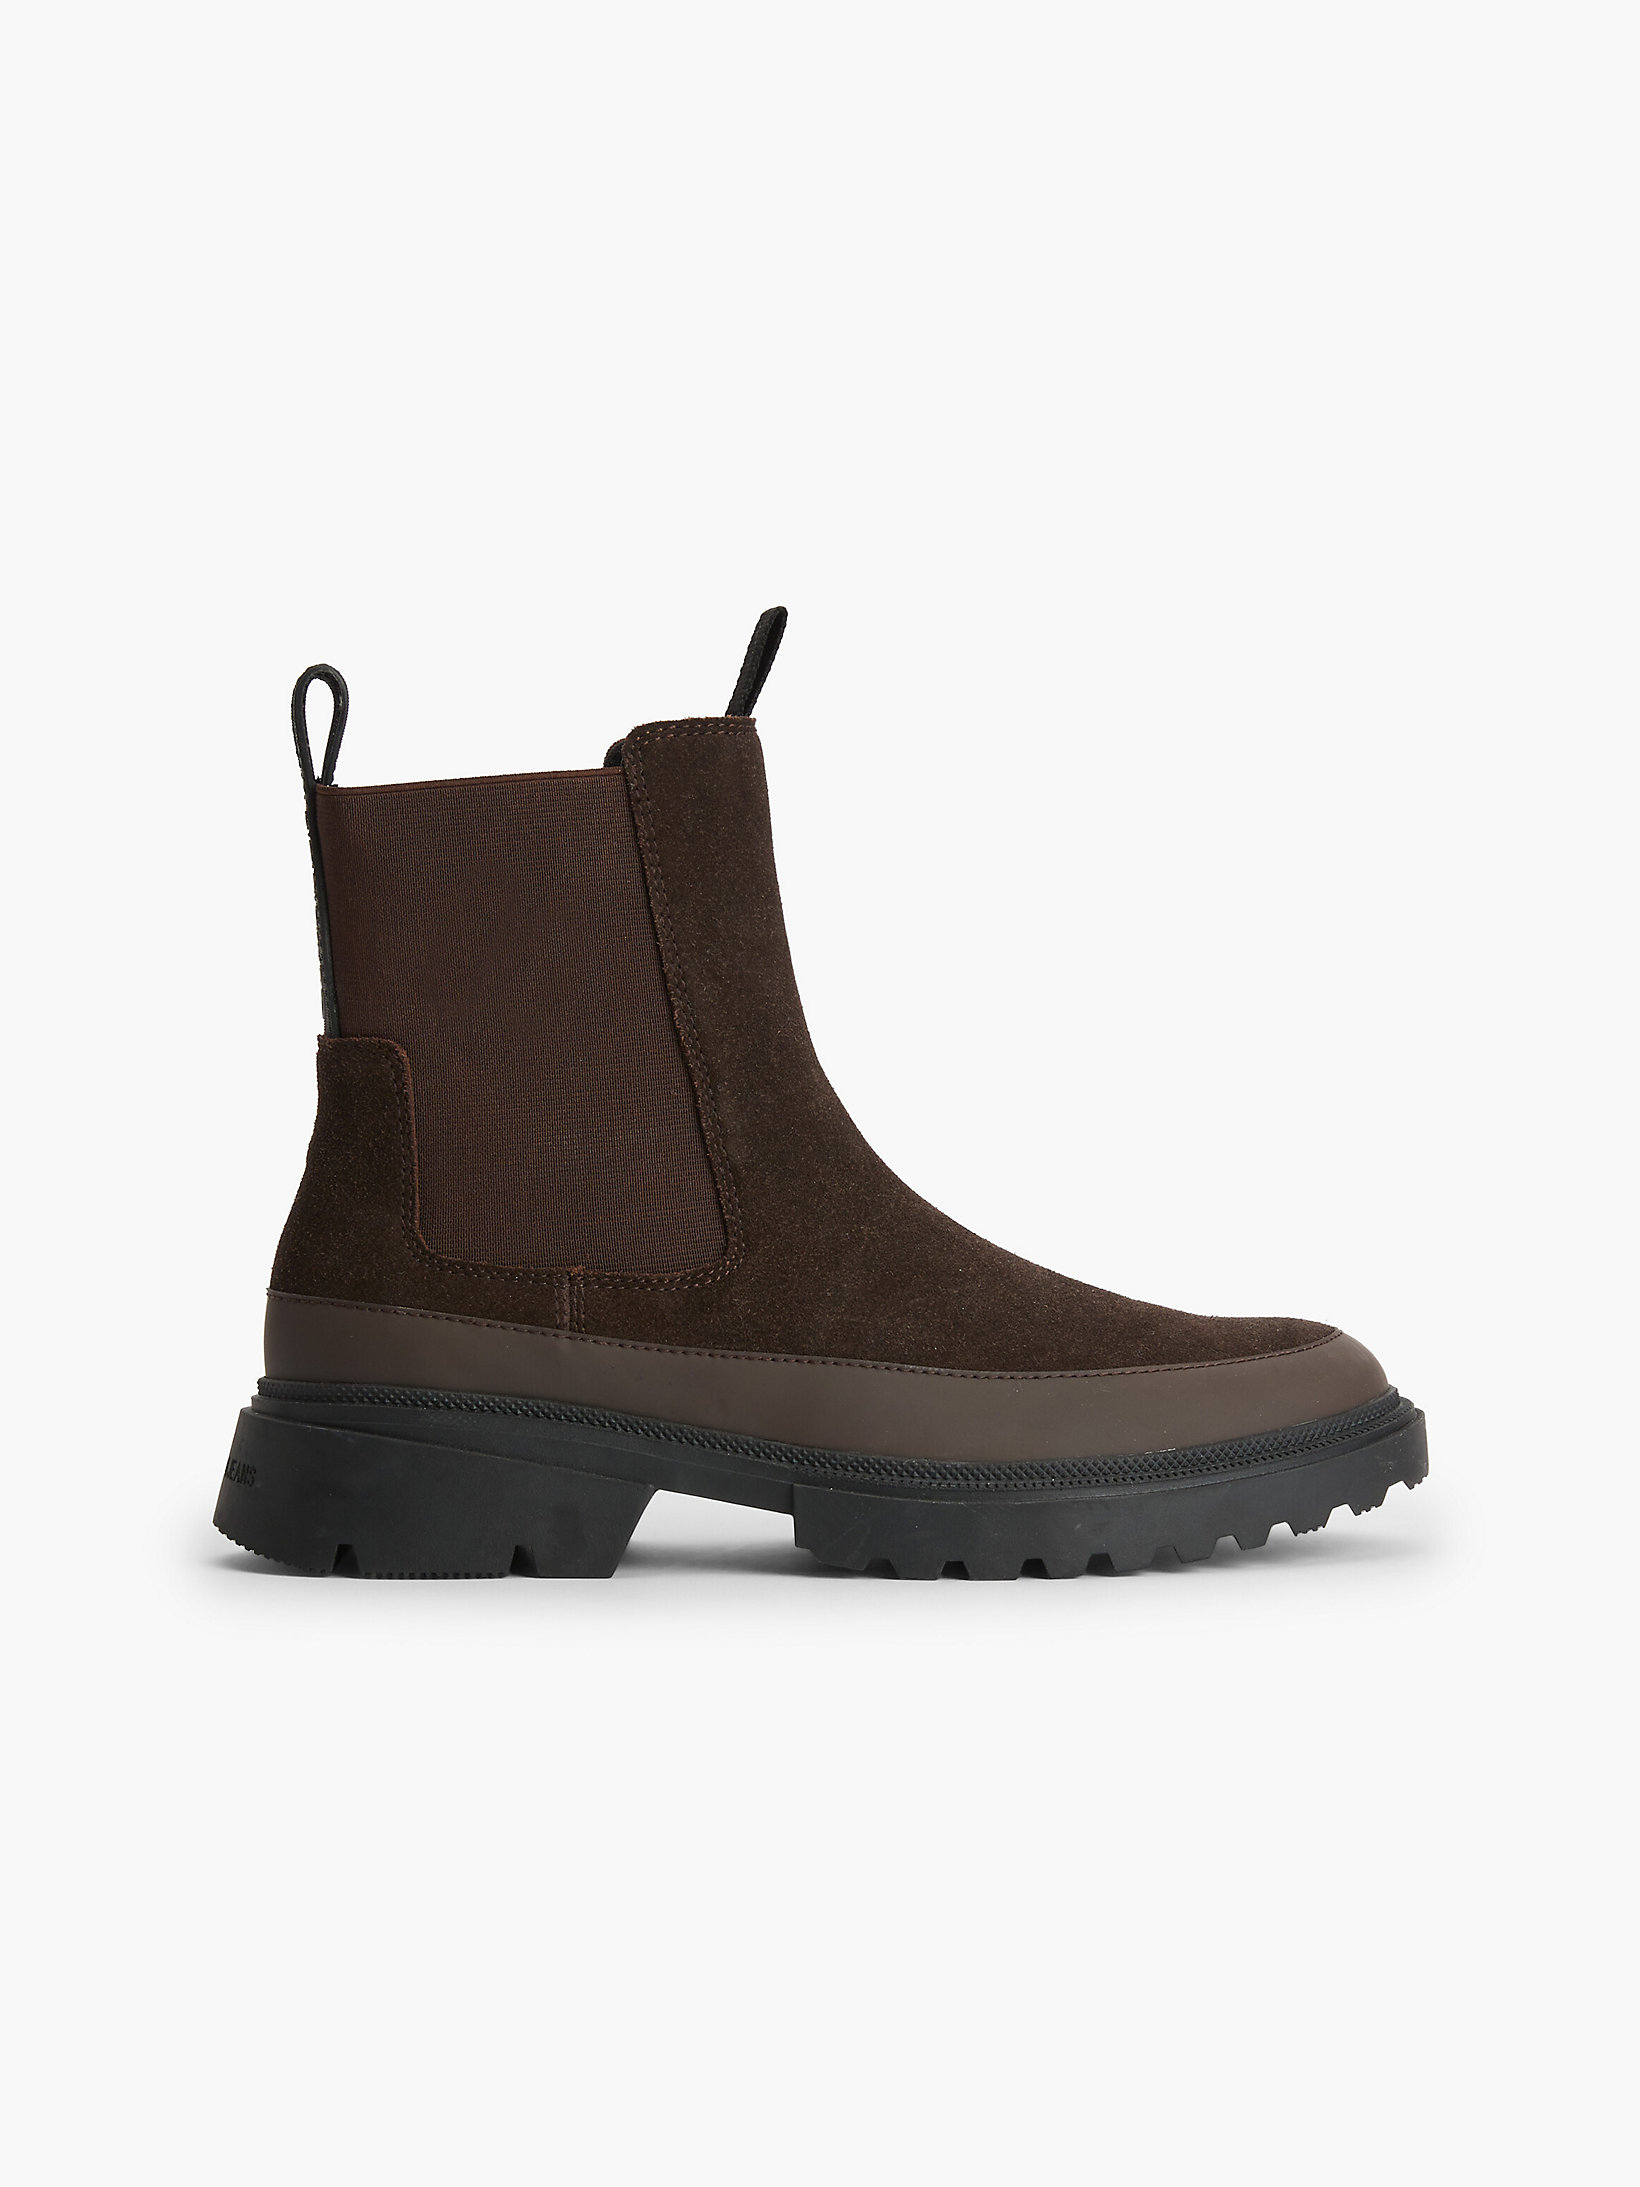 Mocha Brown Suede Chunky Chelsea Boots undefined men Calvin Klein